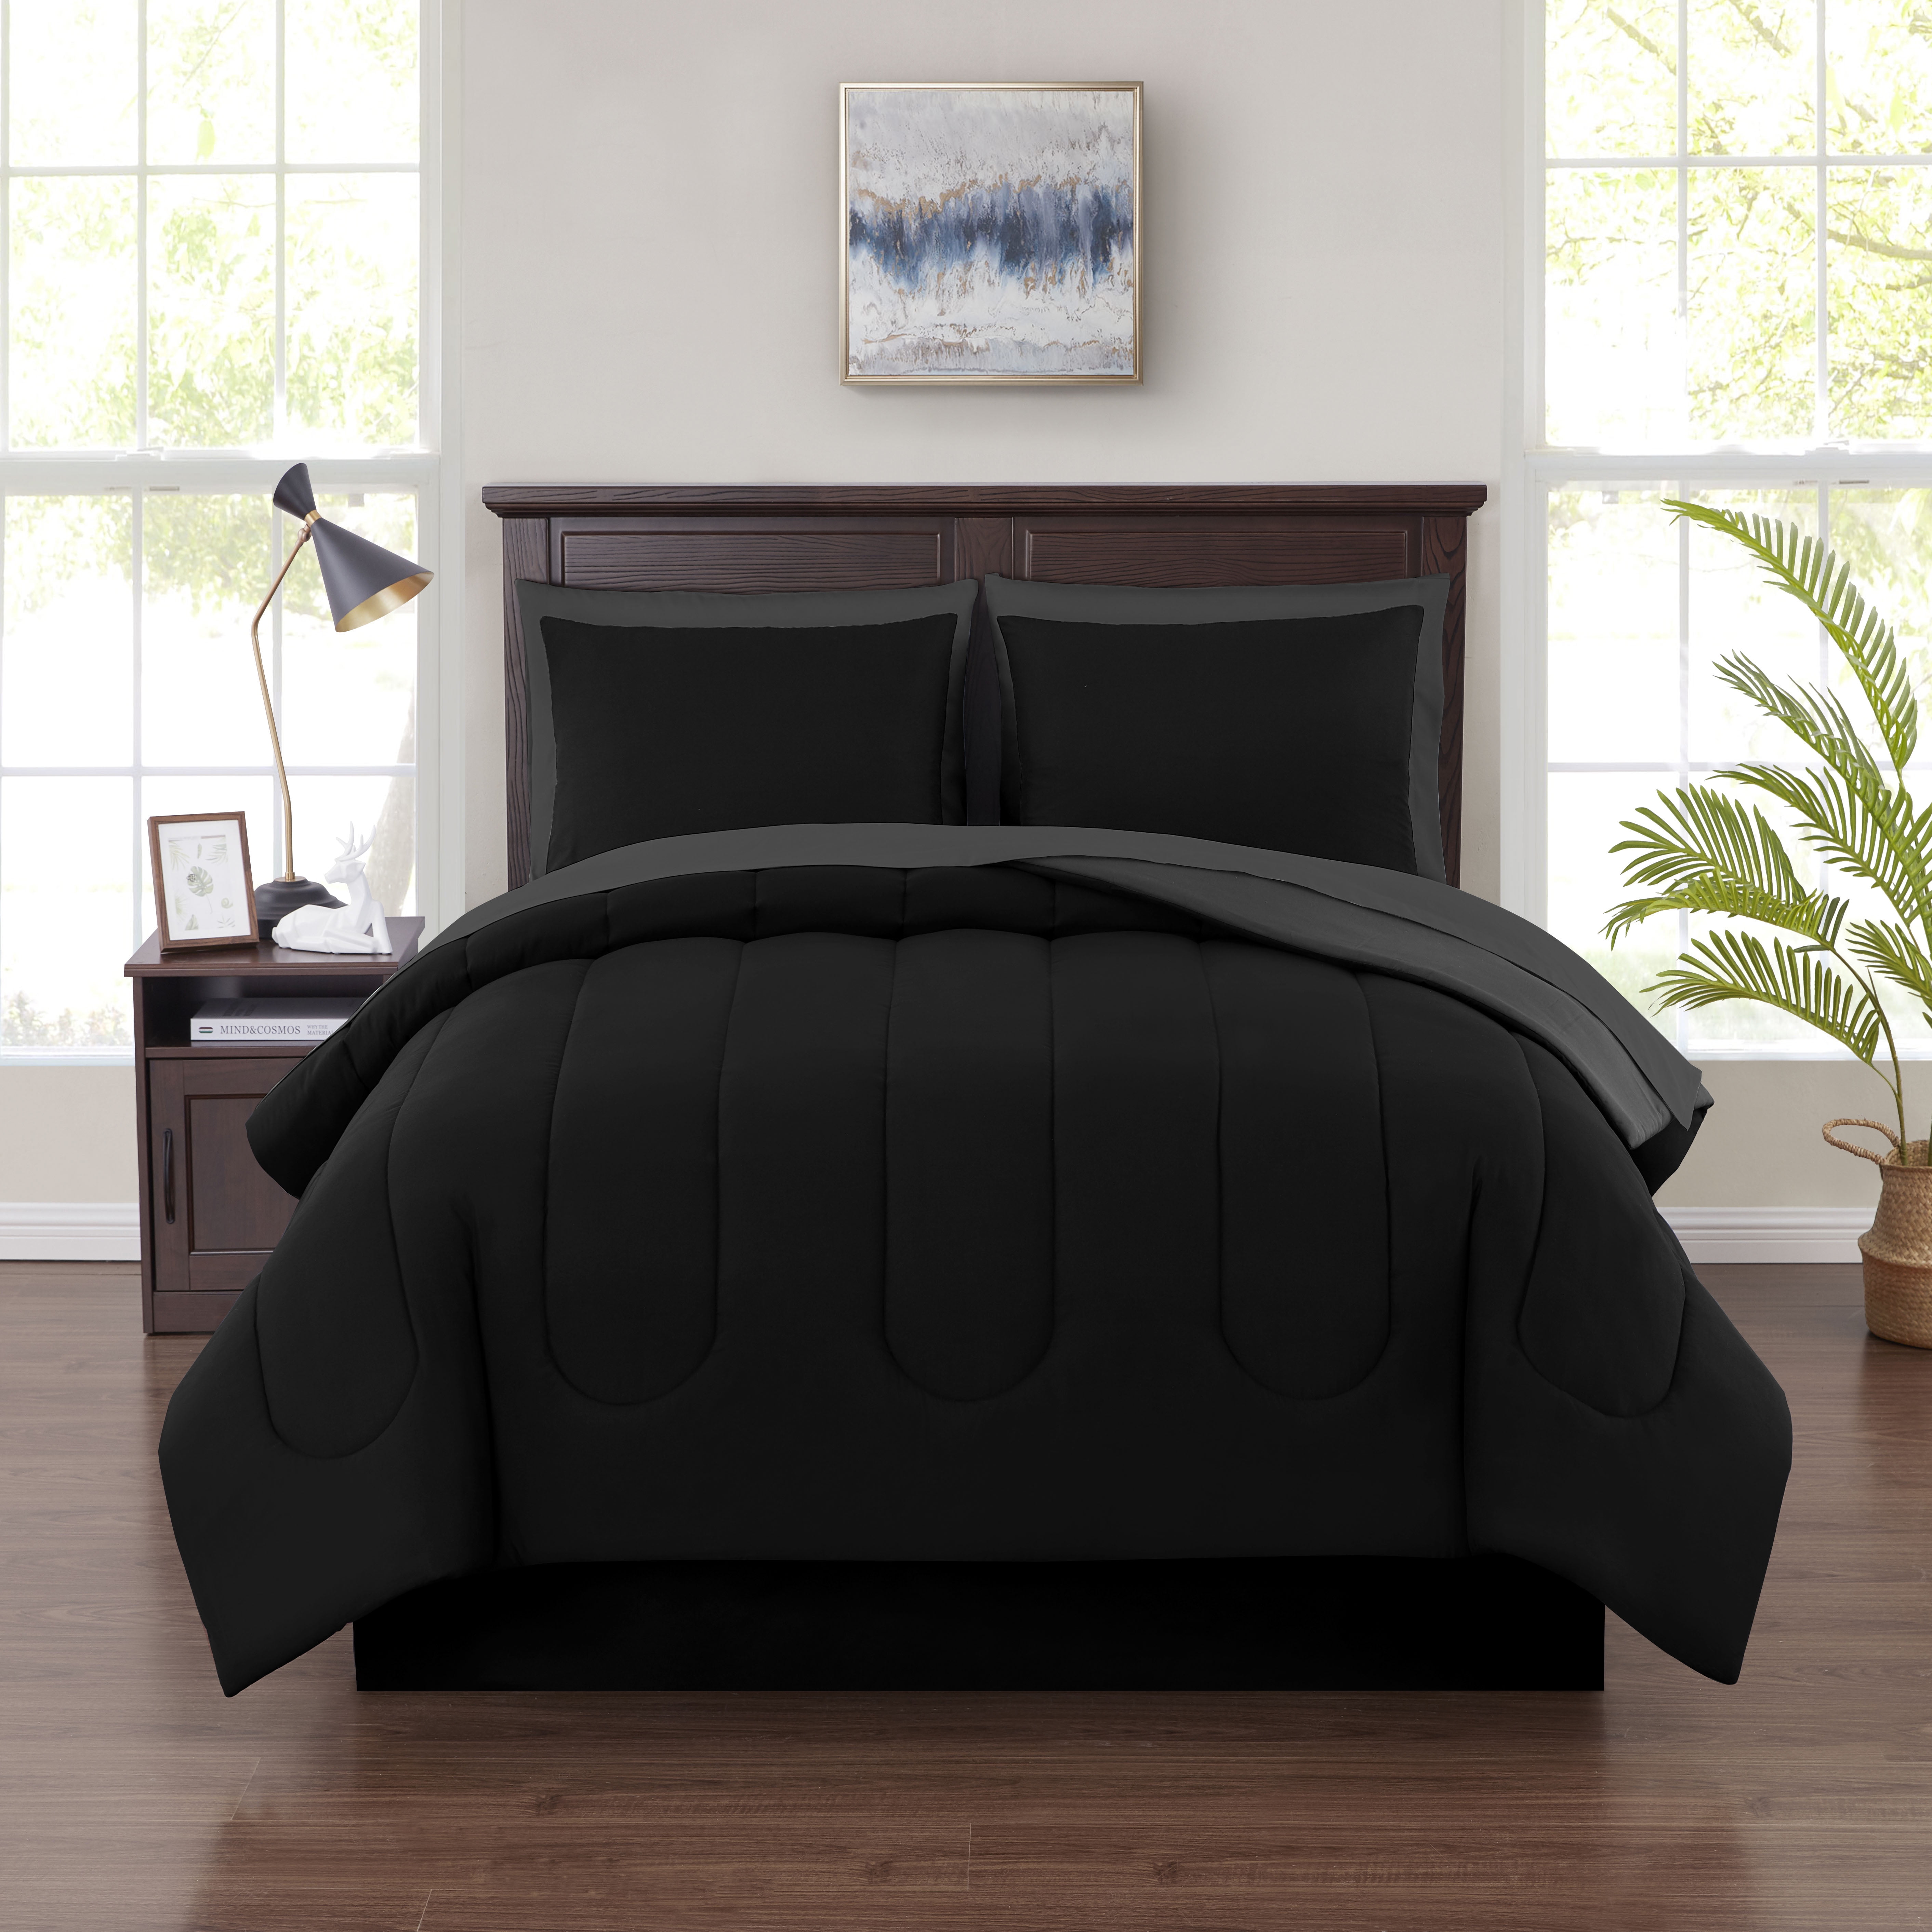 Bed in a Bag Full Size Comforter Set Black Bedding Sheets Pillowcases Shams 8 Pc 